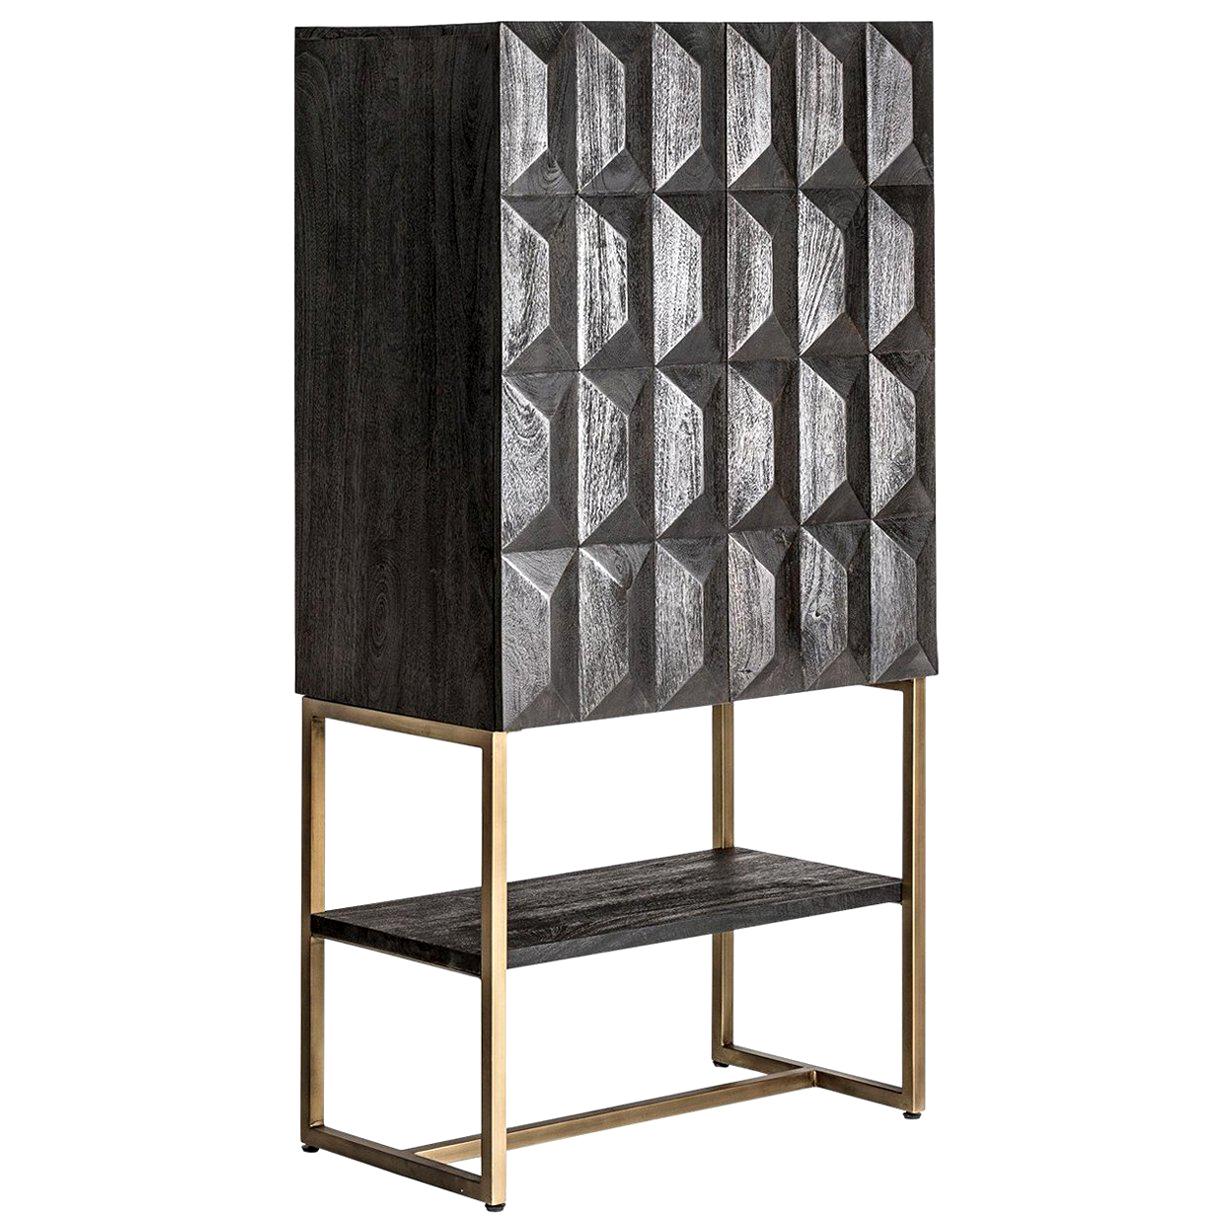 Black Wooden Dry Bar Cabinet Brutalist Style with Graphic Patterns